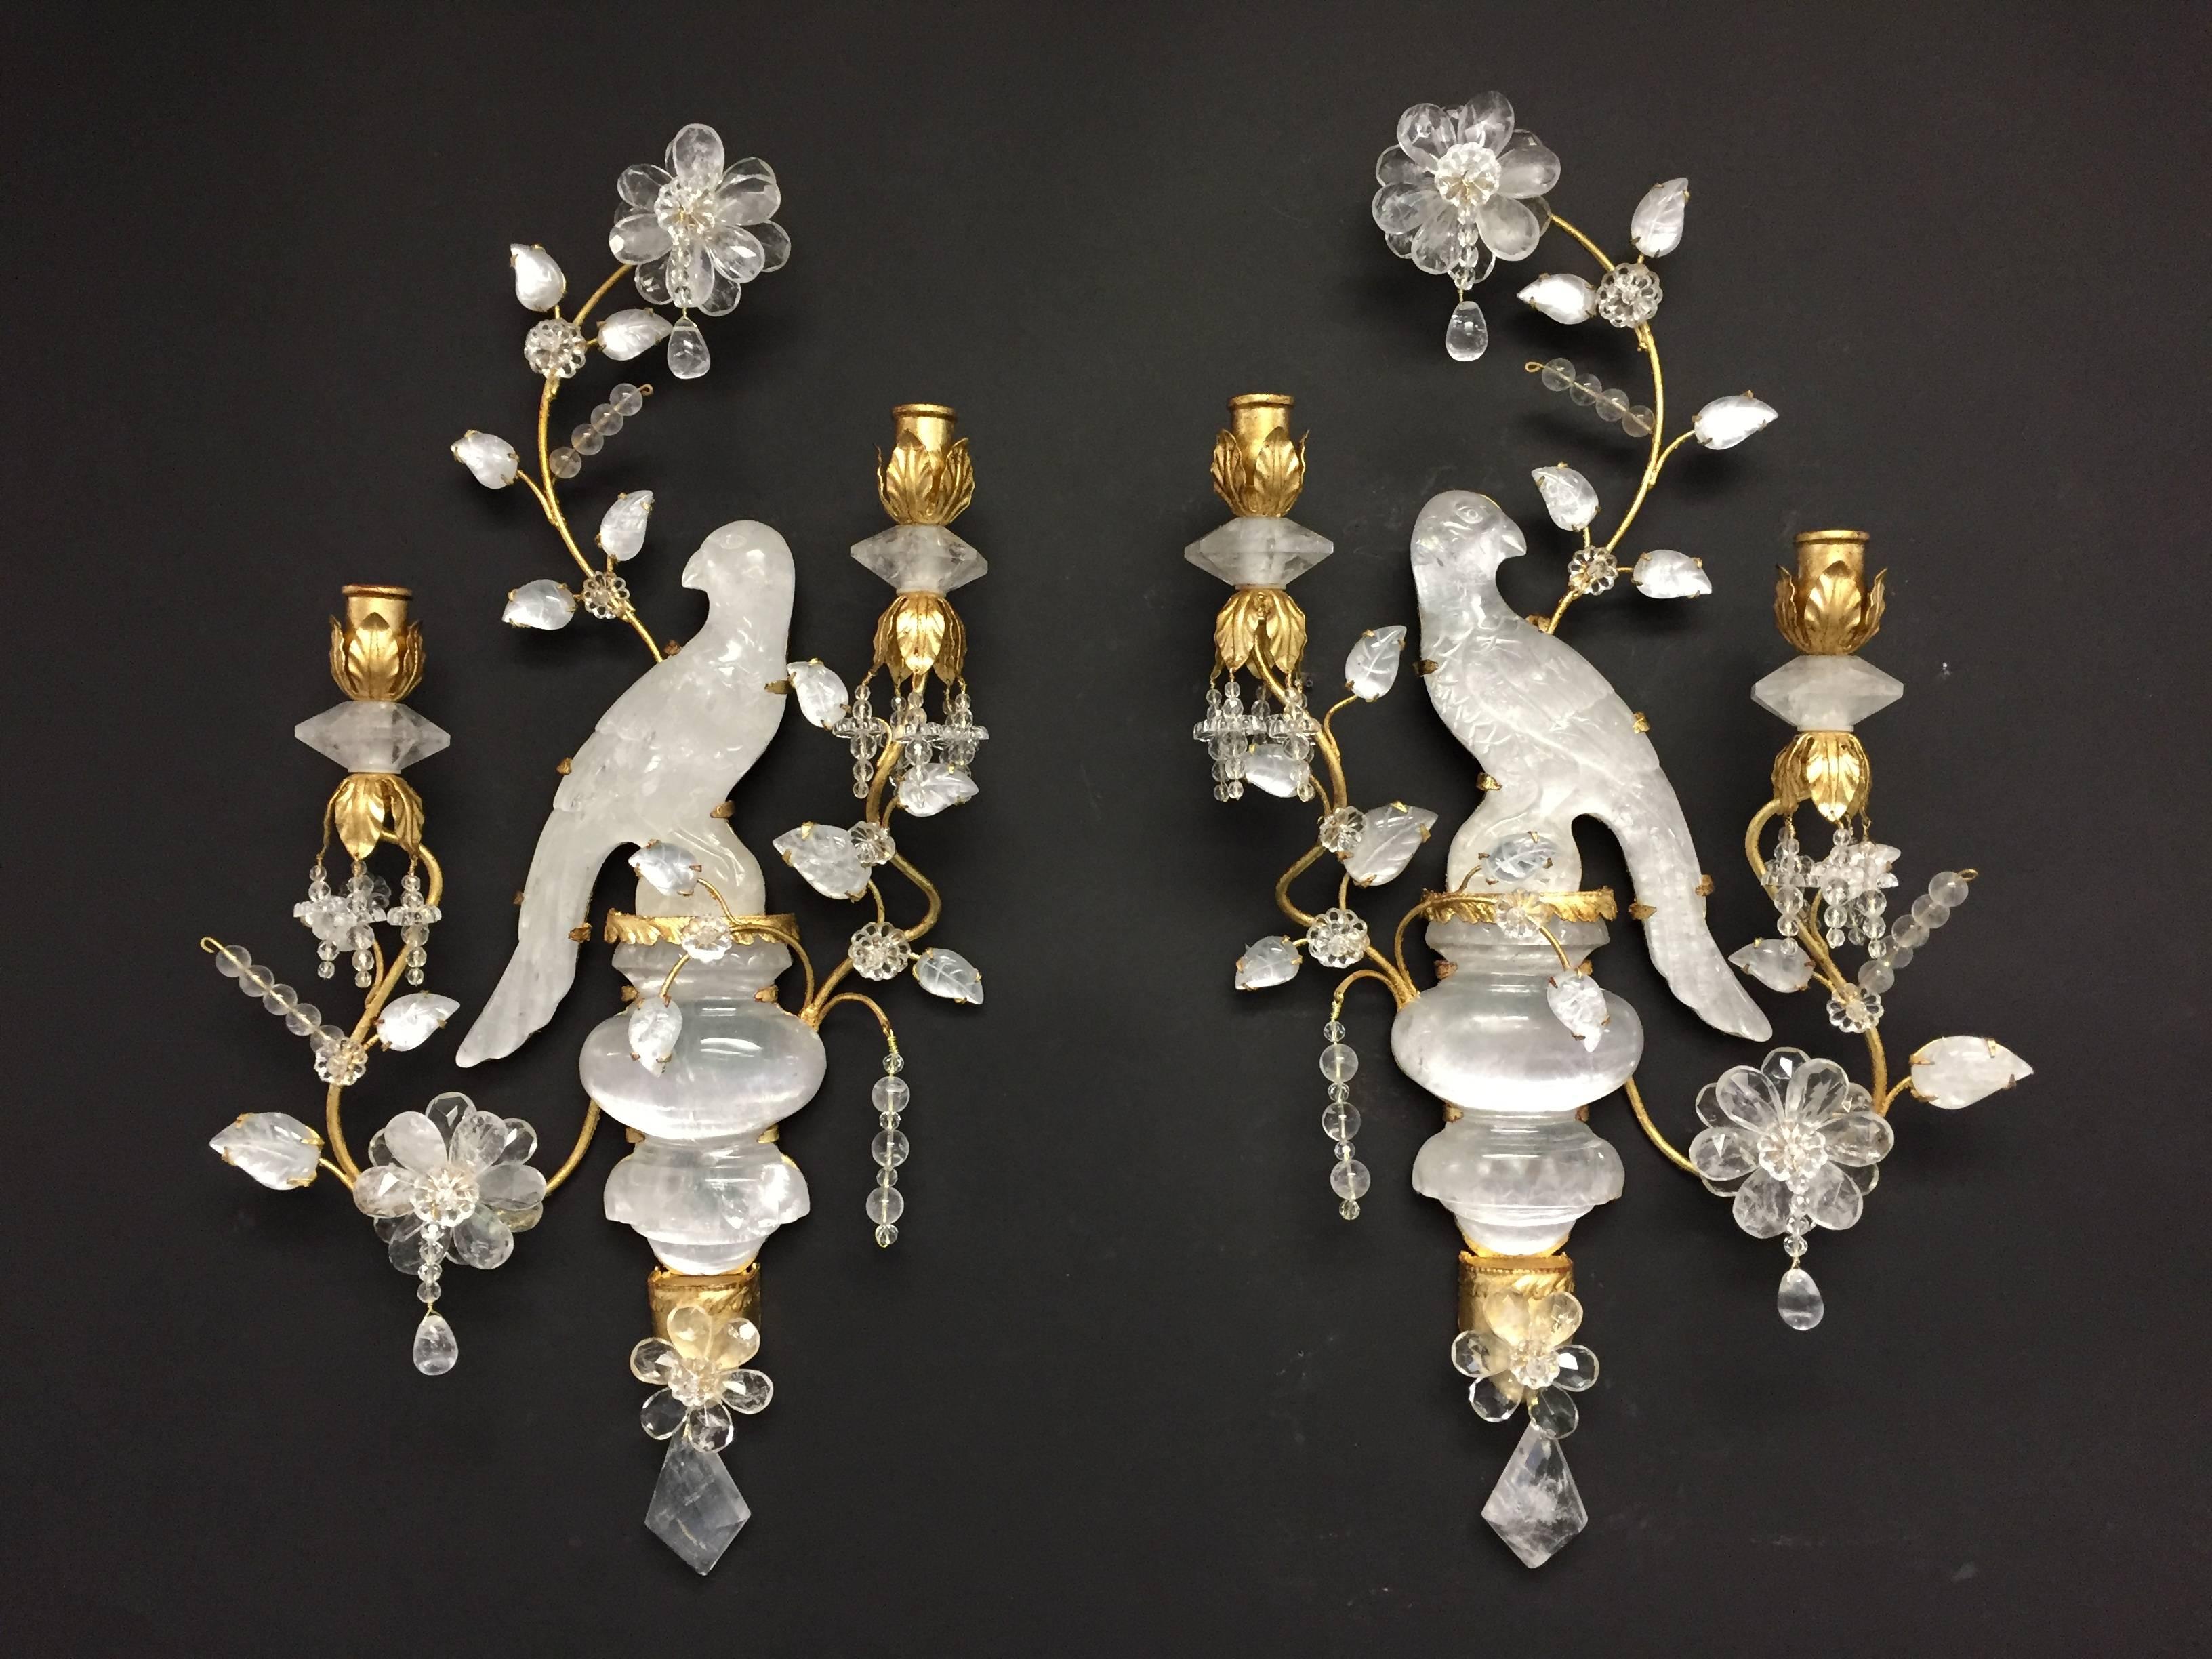 
These endearing Bagues style Vintage two-arm gilt and rock crystal sconces are beautifully balanced with leaves, flowers and the large rock crystal urn the bird is sitting on. Fluted crystal bobeches set off the gilt leaf candle cups sitting next